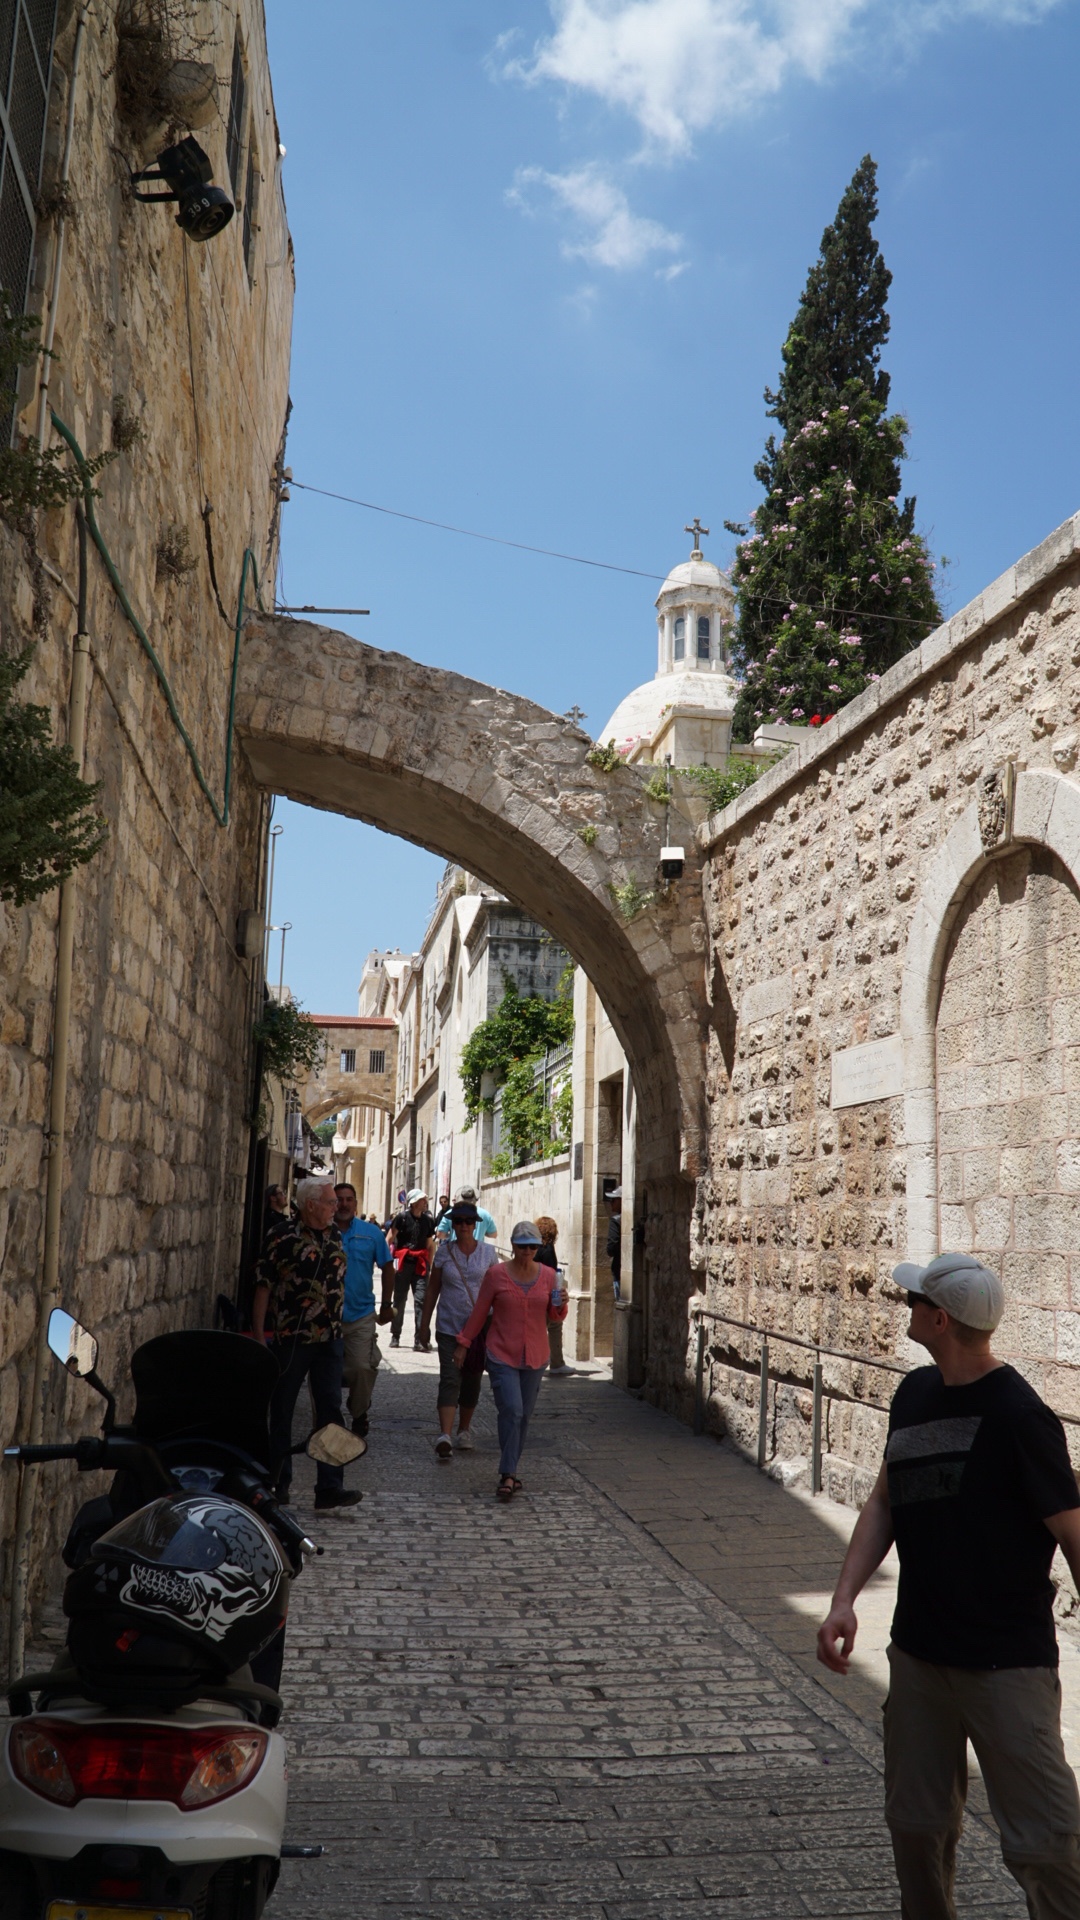 “Behold the Man” Arch where Jesus was presented to the crowds